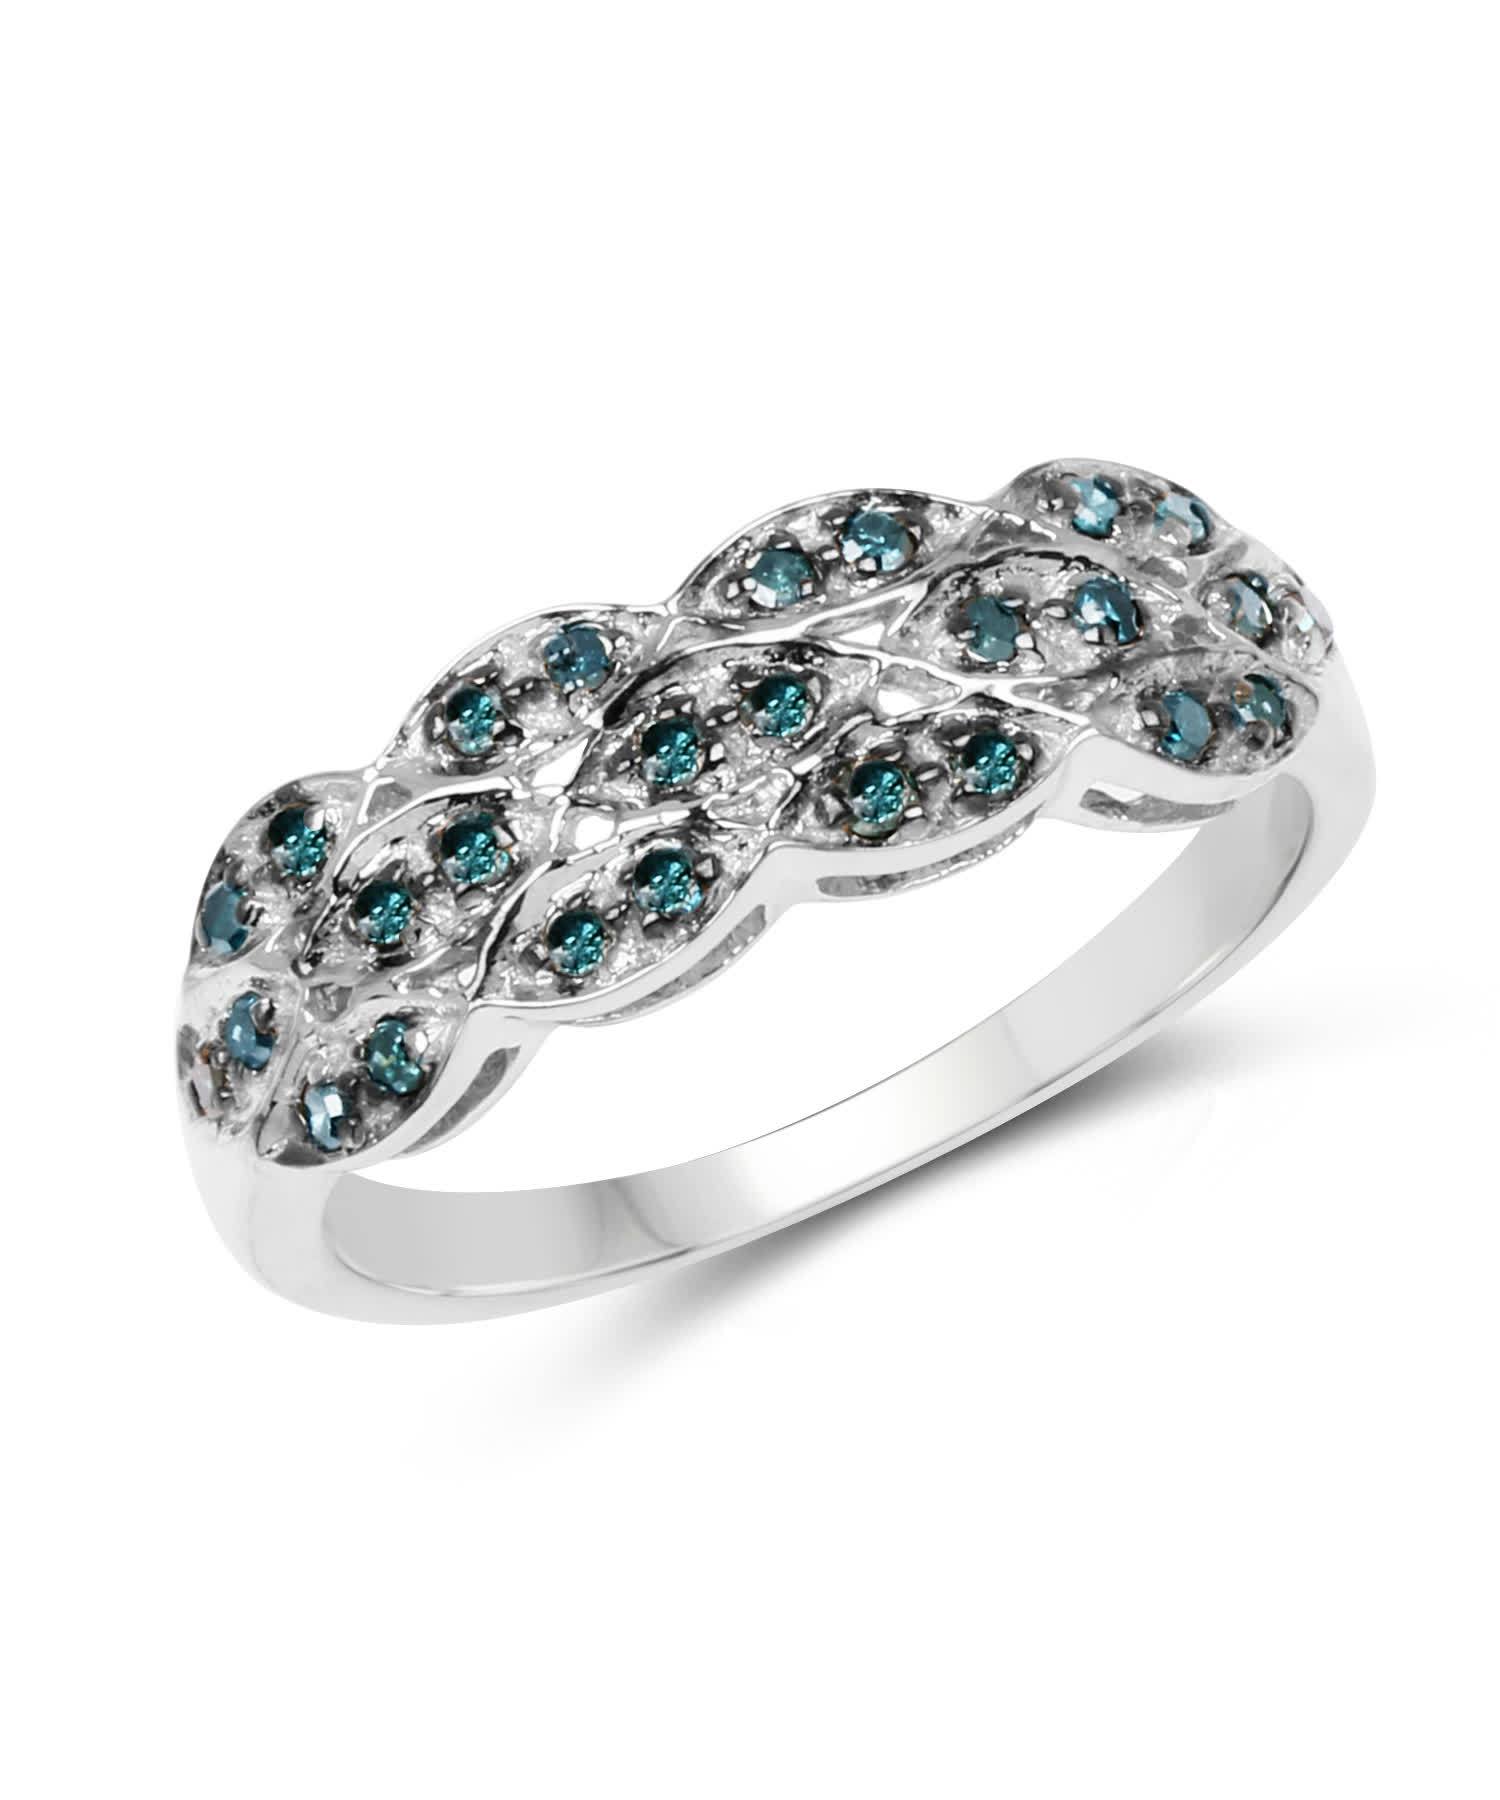 0.31ctw Fancy Blue Diamond Rhodium Plated 925 Sterling Silver Fashion Ring View 1